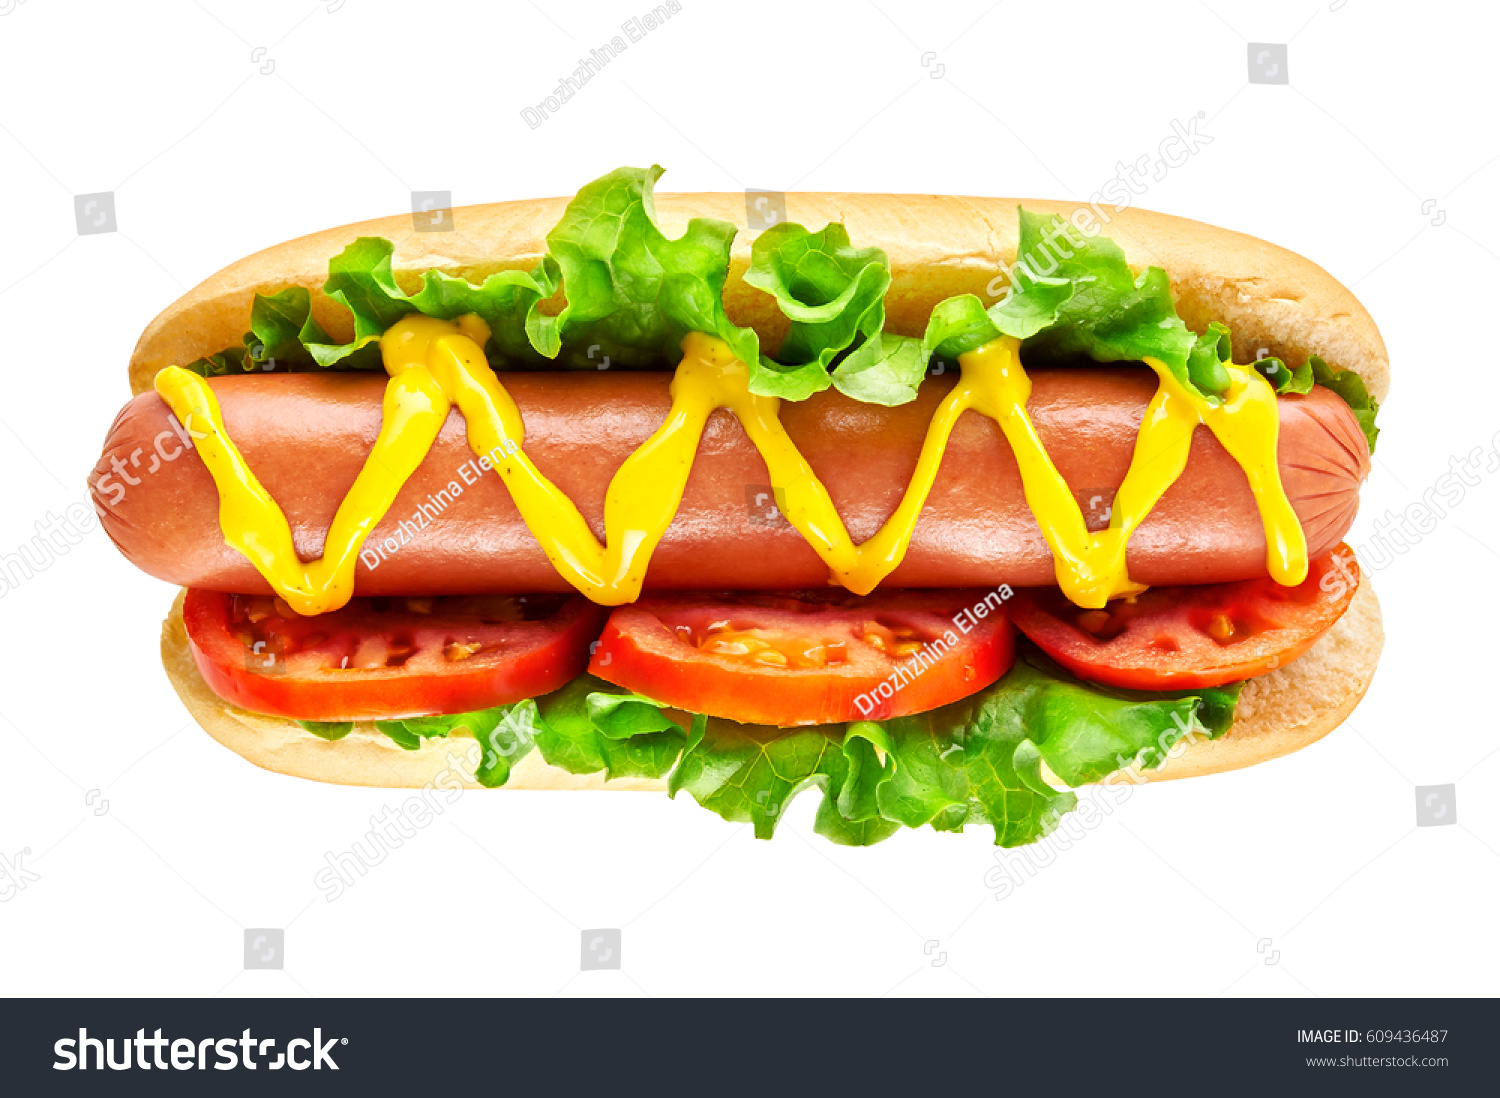 Hot dog with big sausage and fresh tomato isolated on white. Top view. #609436487